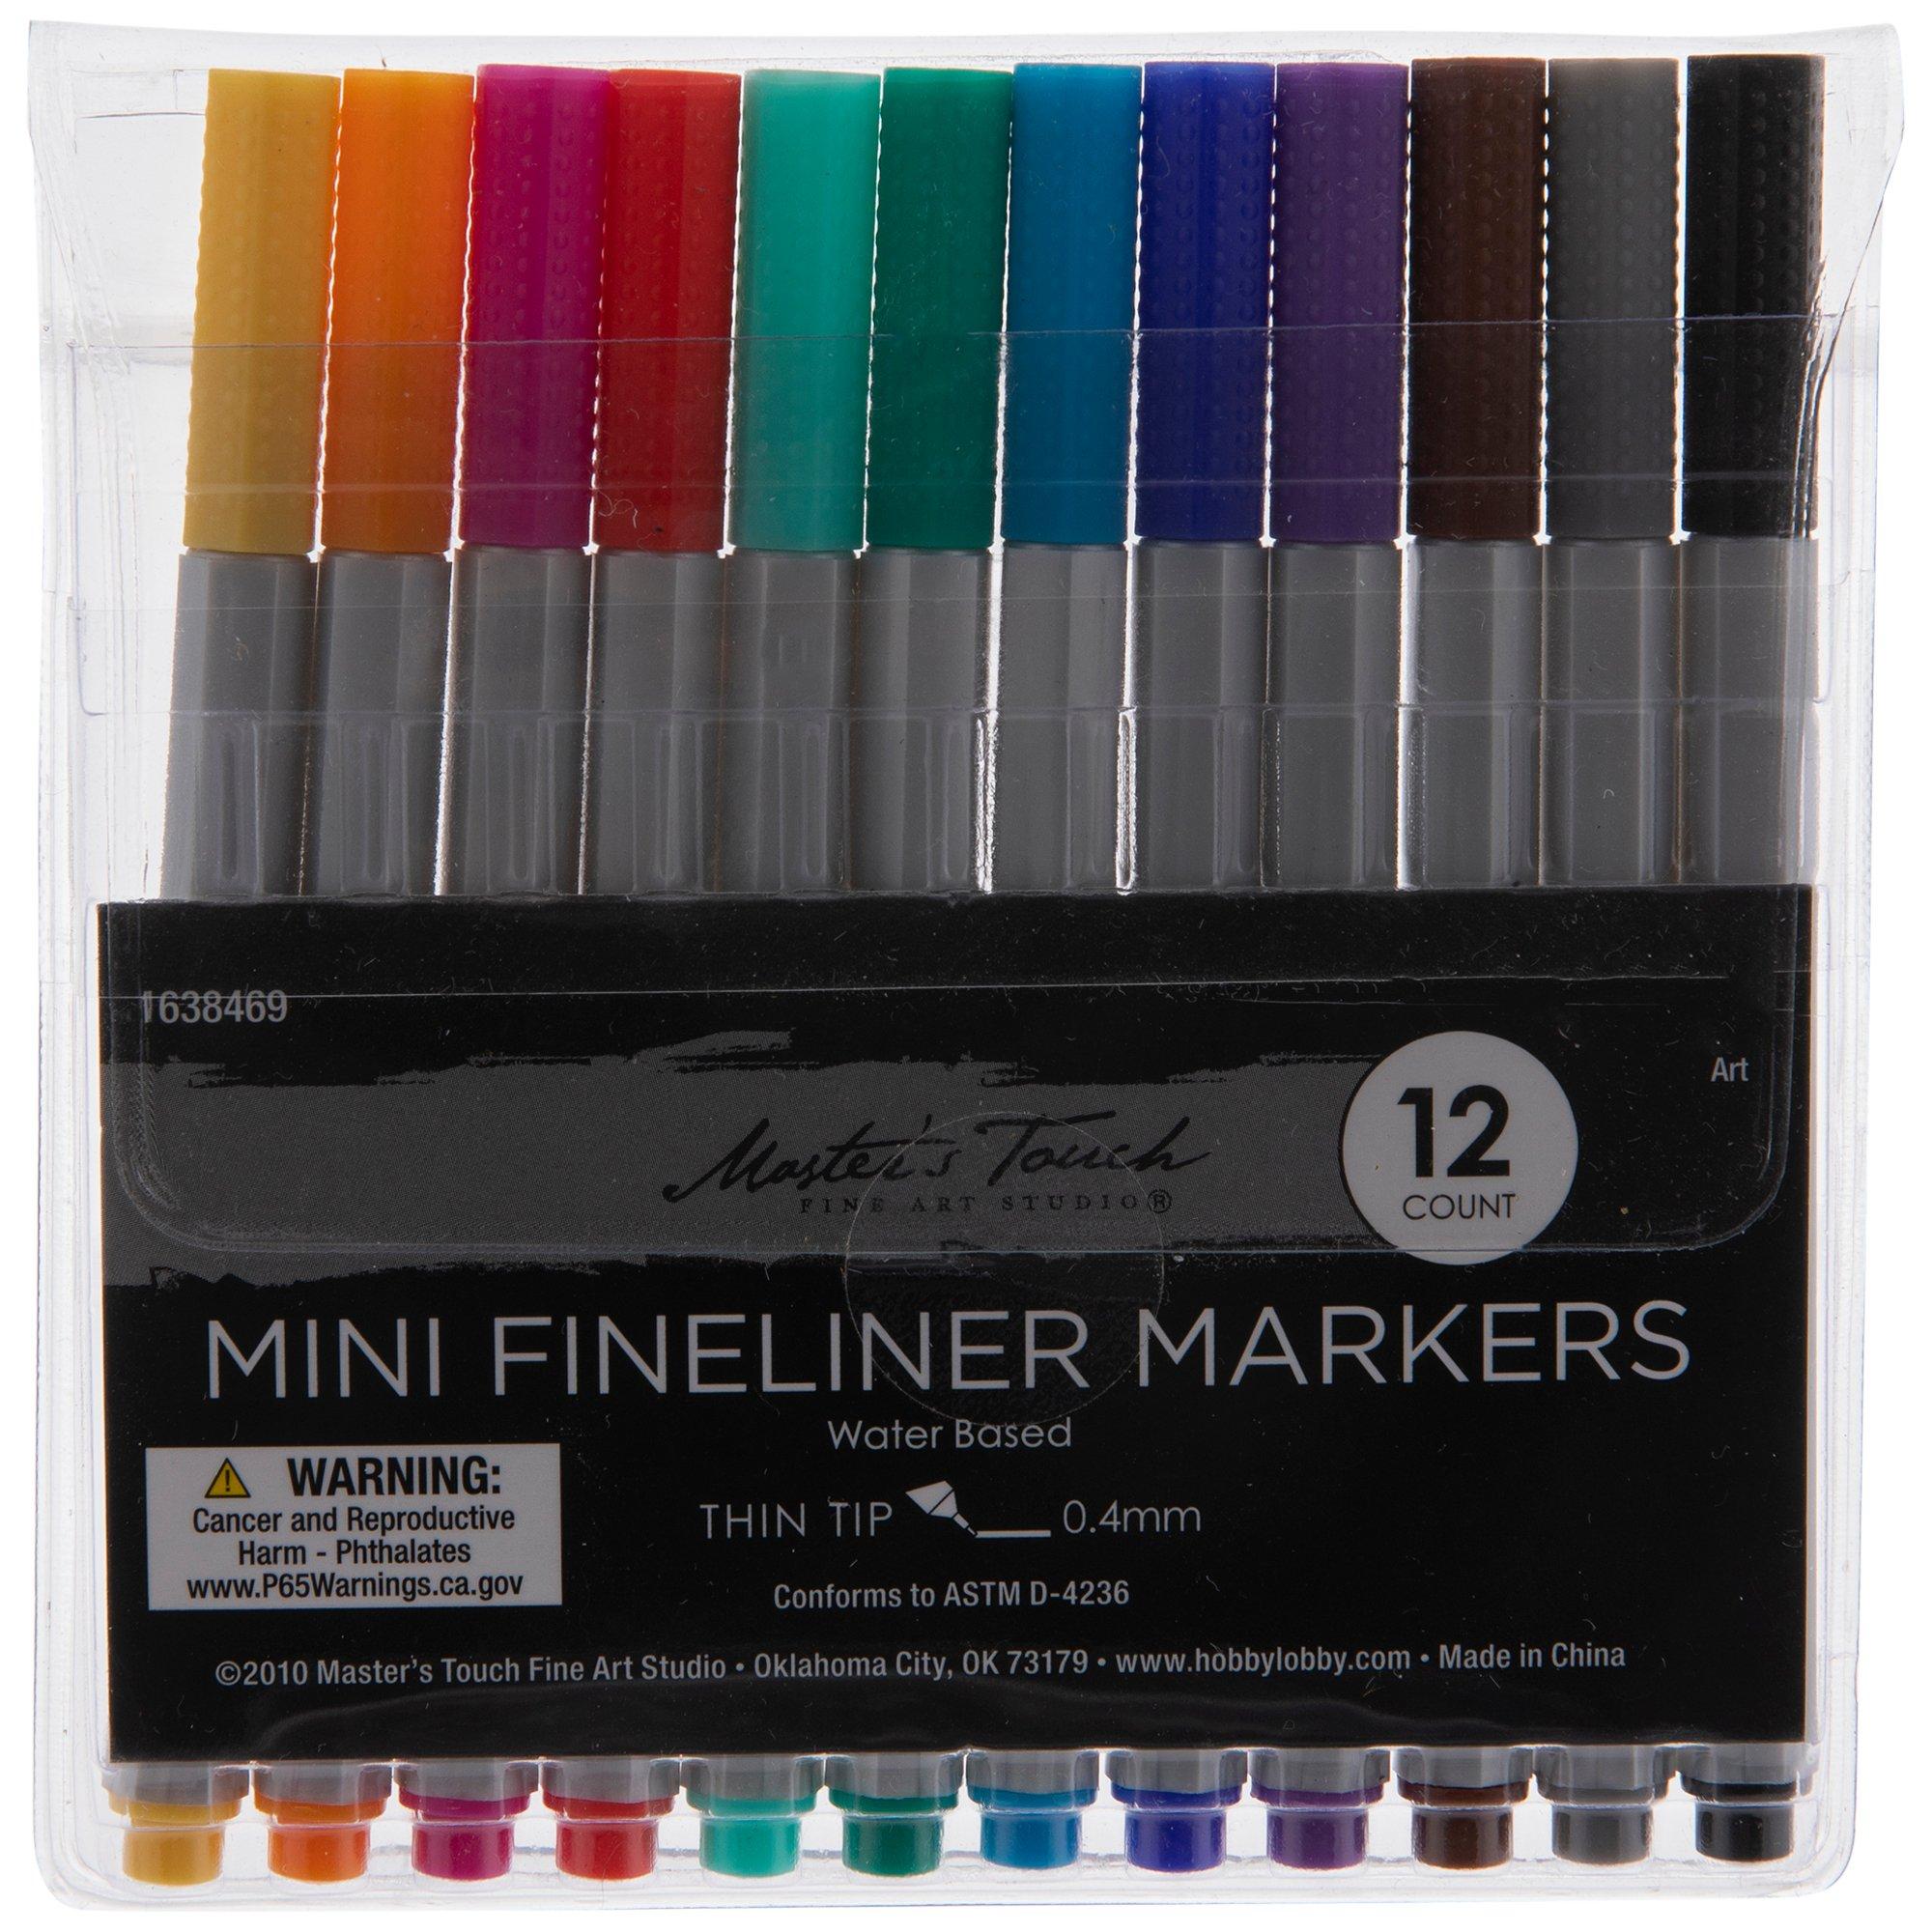 Signature Fine-Tip Markers with Case (12pc) – Harepin Creative